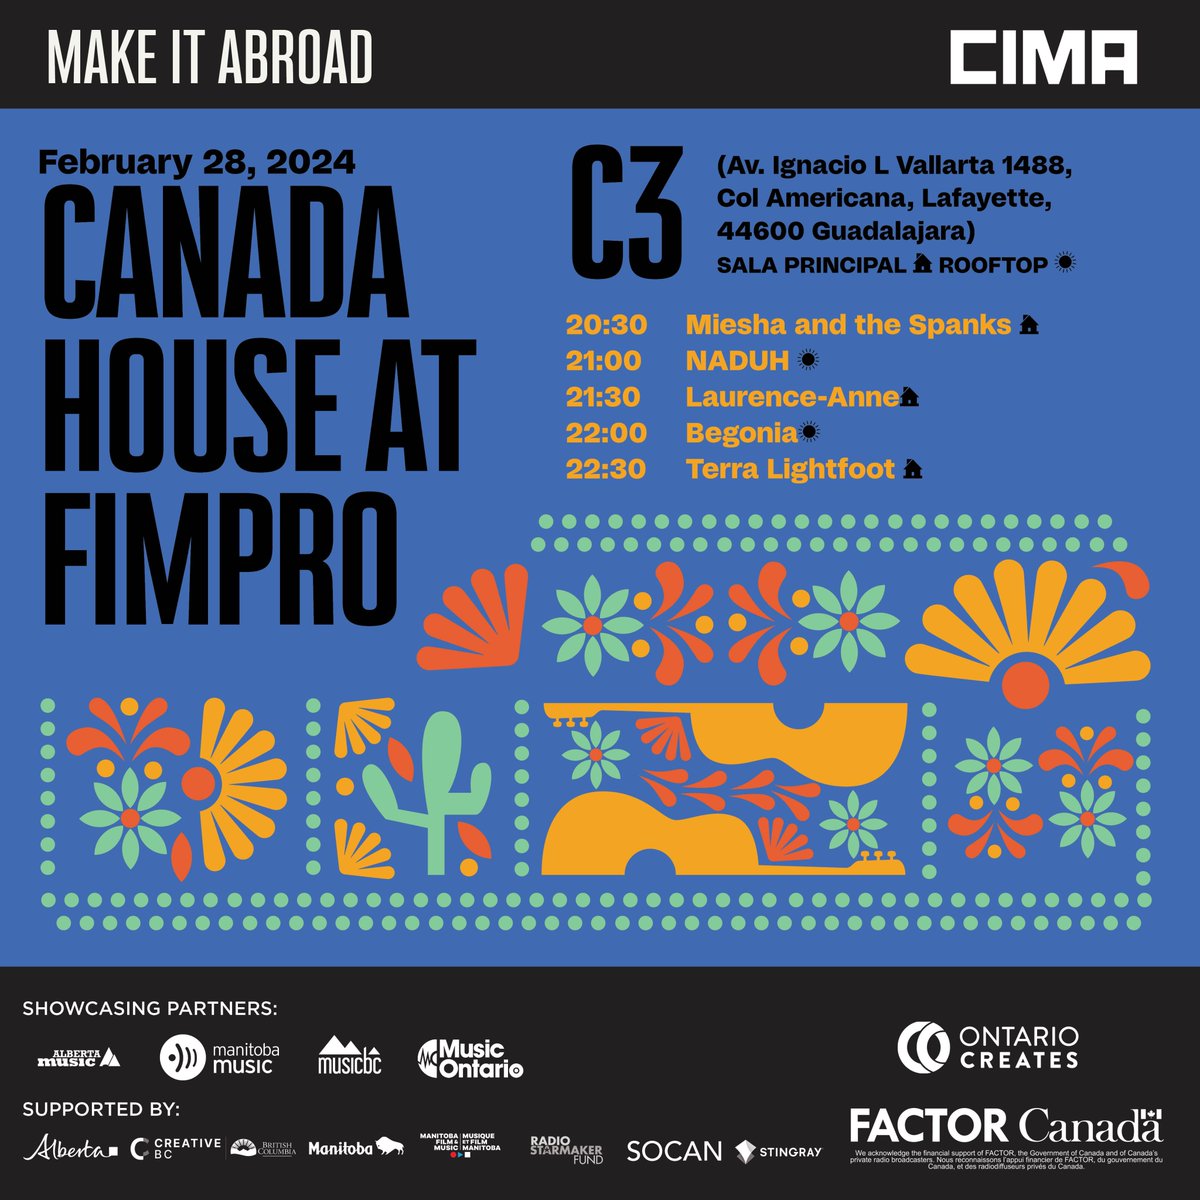 Canada House returns to FIMPRO in Guadalajara, Mexico this Wednesday! Don't miss performances from Miesha and the Spanks, NADUH, Laurence-Anne, Begonia & Terra Lightfoot at C3 starting at 8:30PM. cimamusic.ca/news/recent-ne…